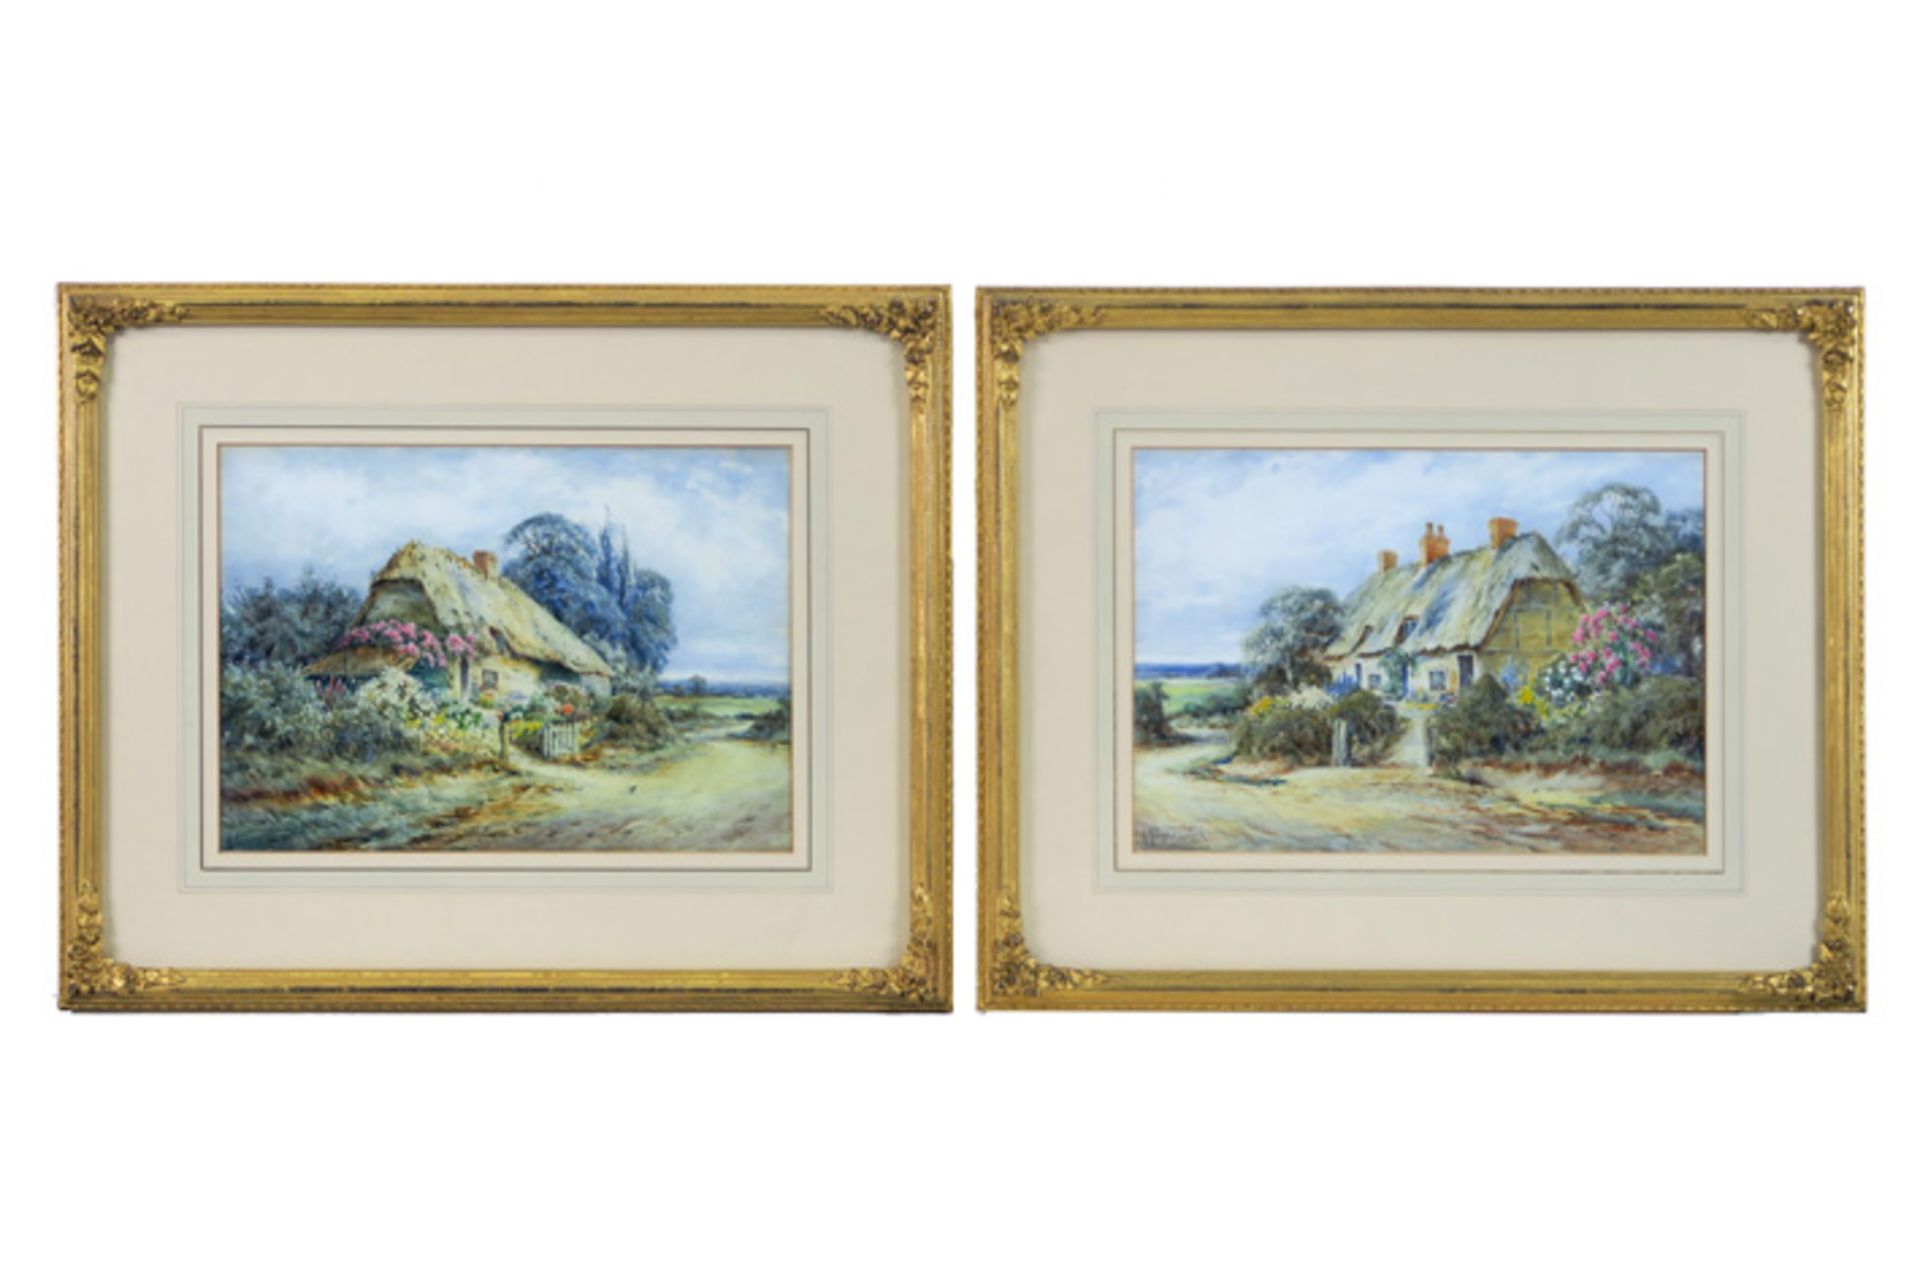 20th Cent. English pendant of two Alexander Molyneux Stannard signed watercolors with typical themes